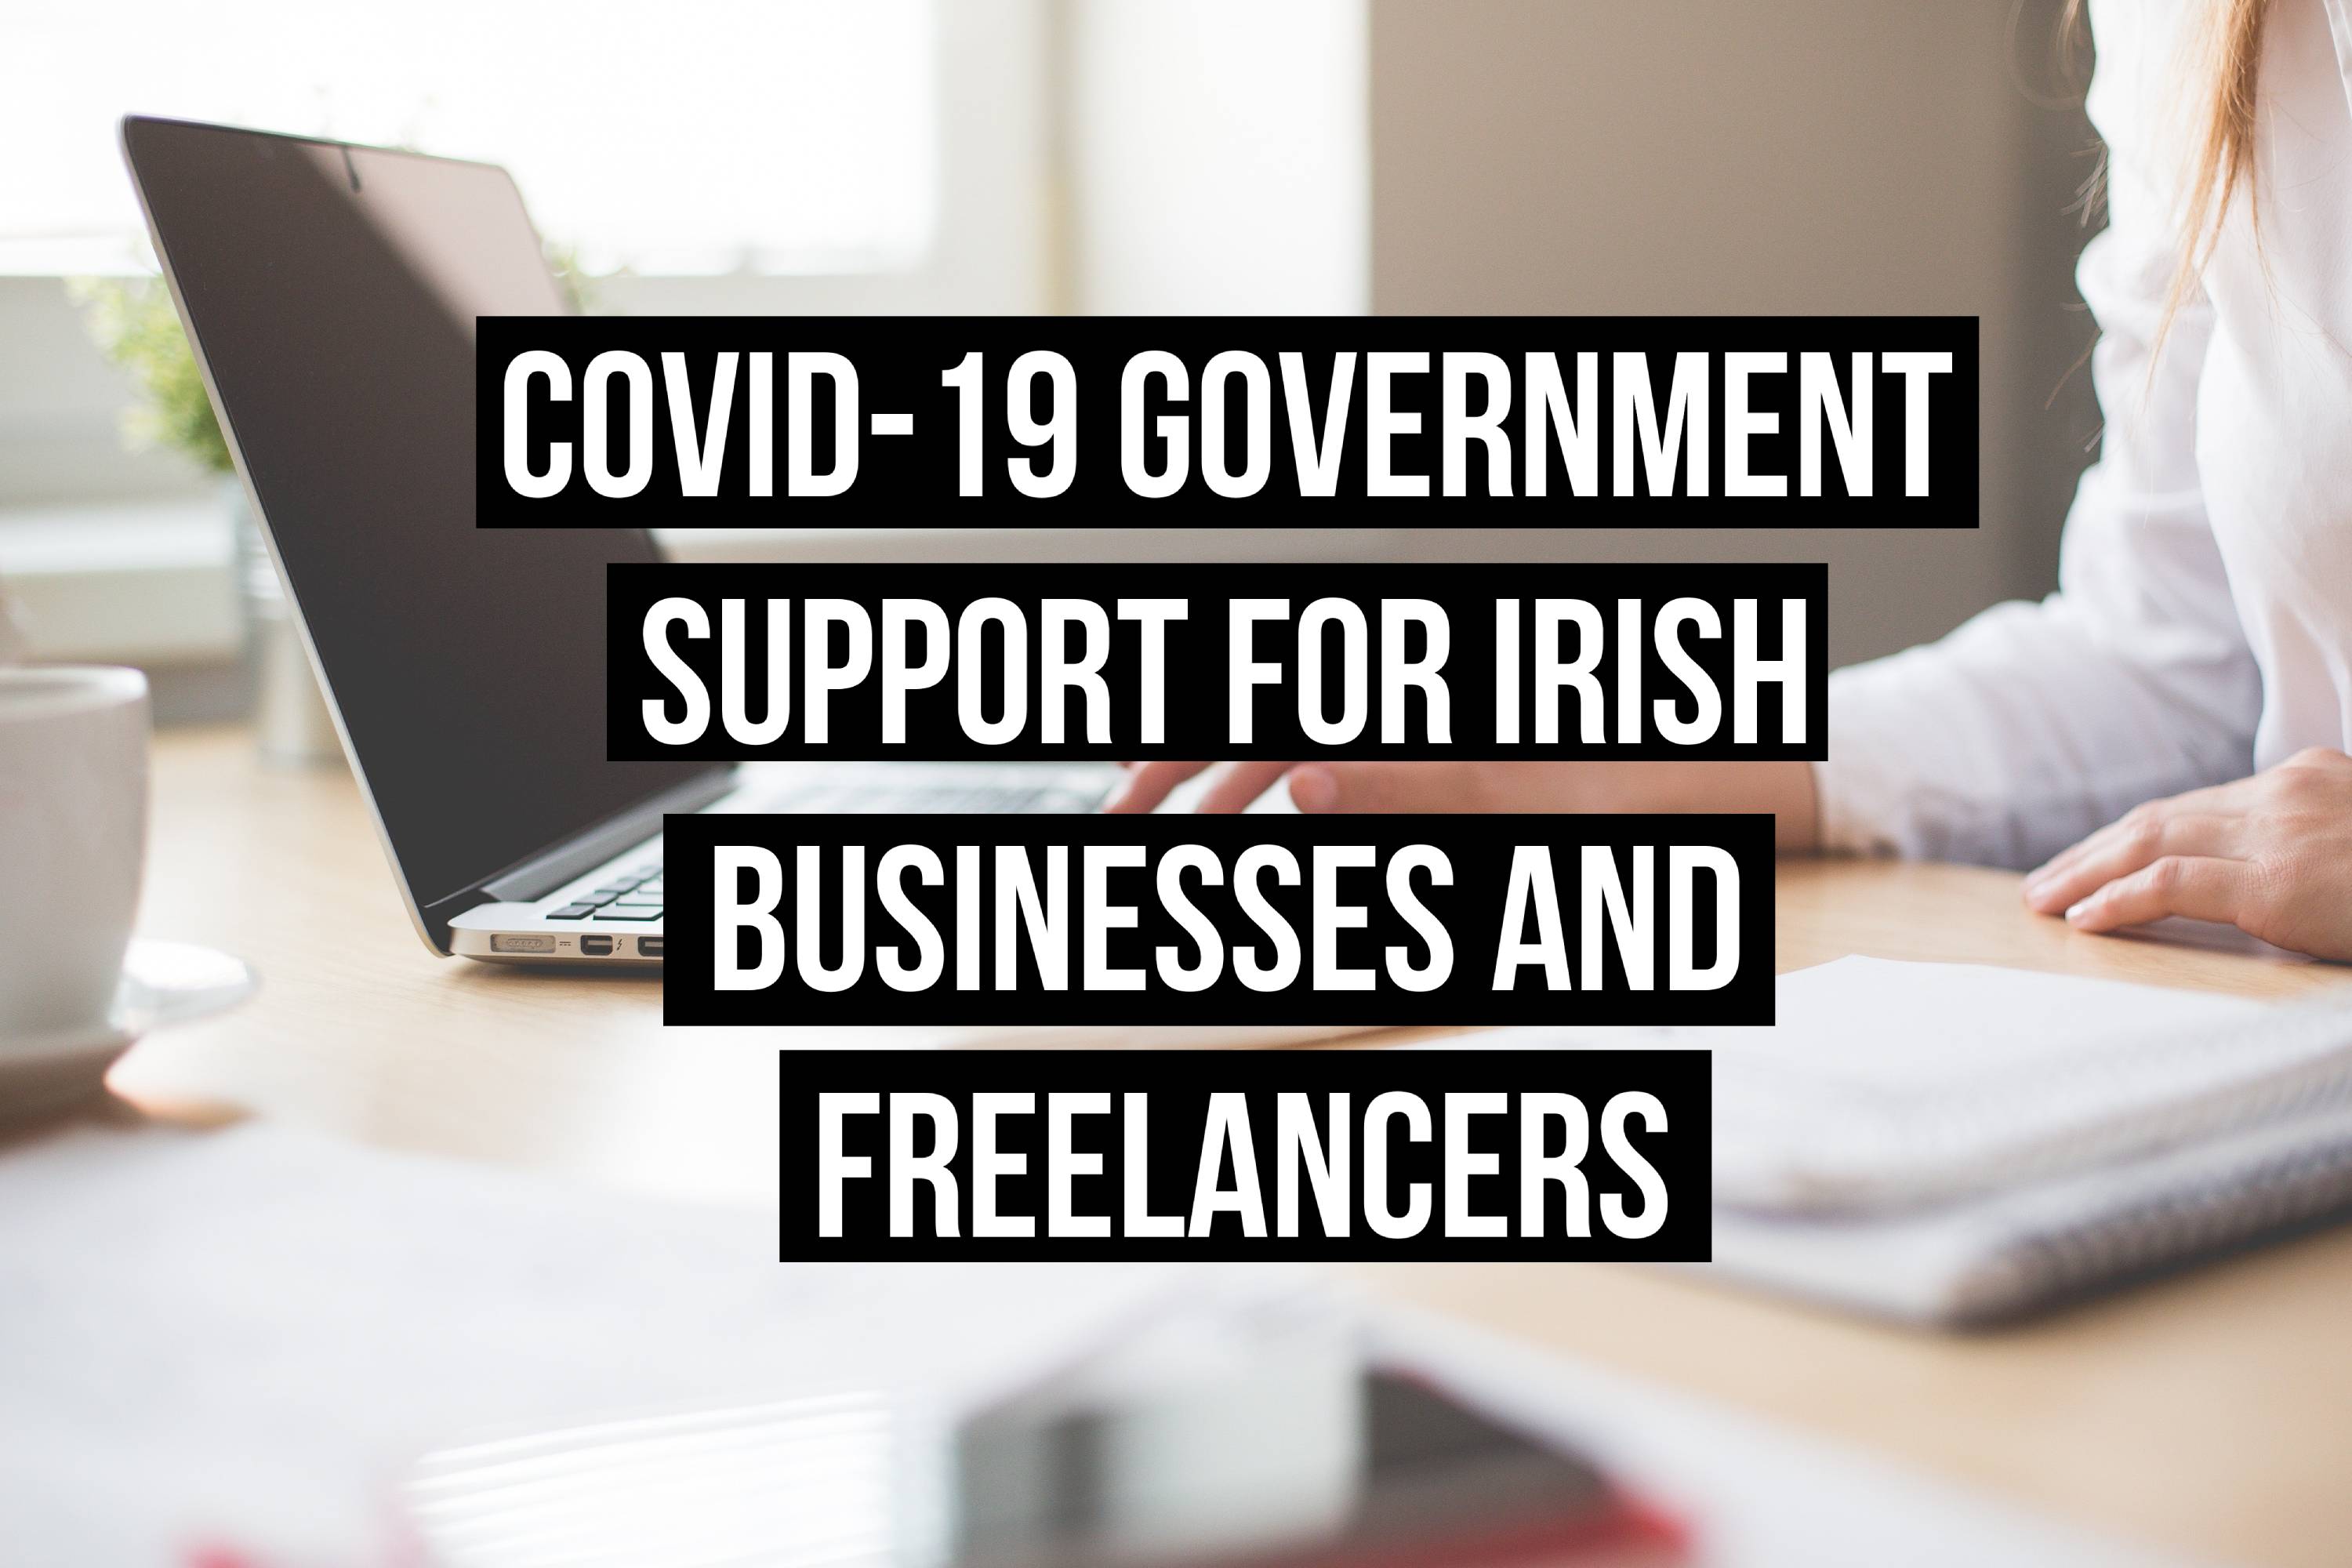 Covid-19 government support for Irish businesses and freelancers title